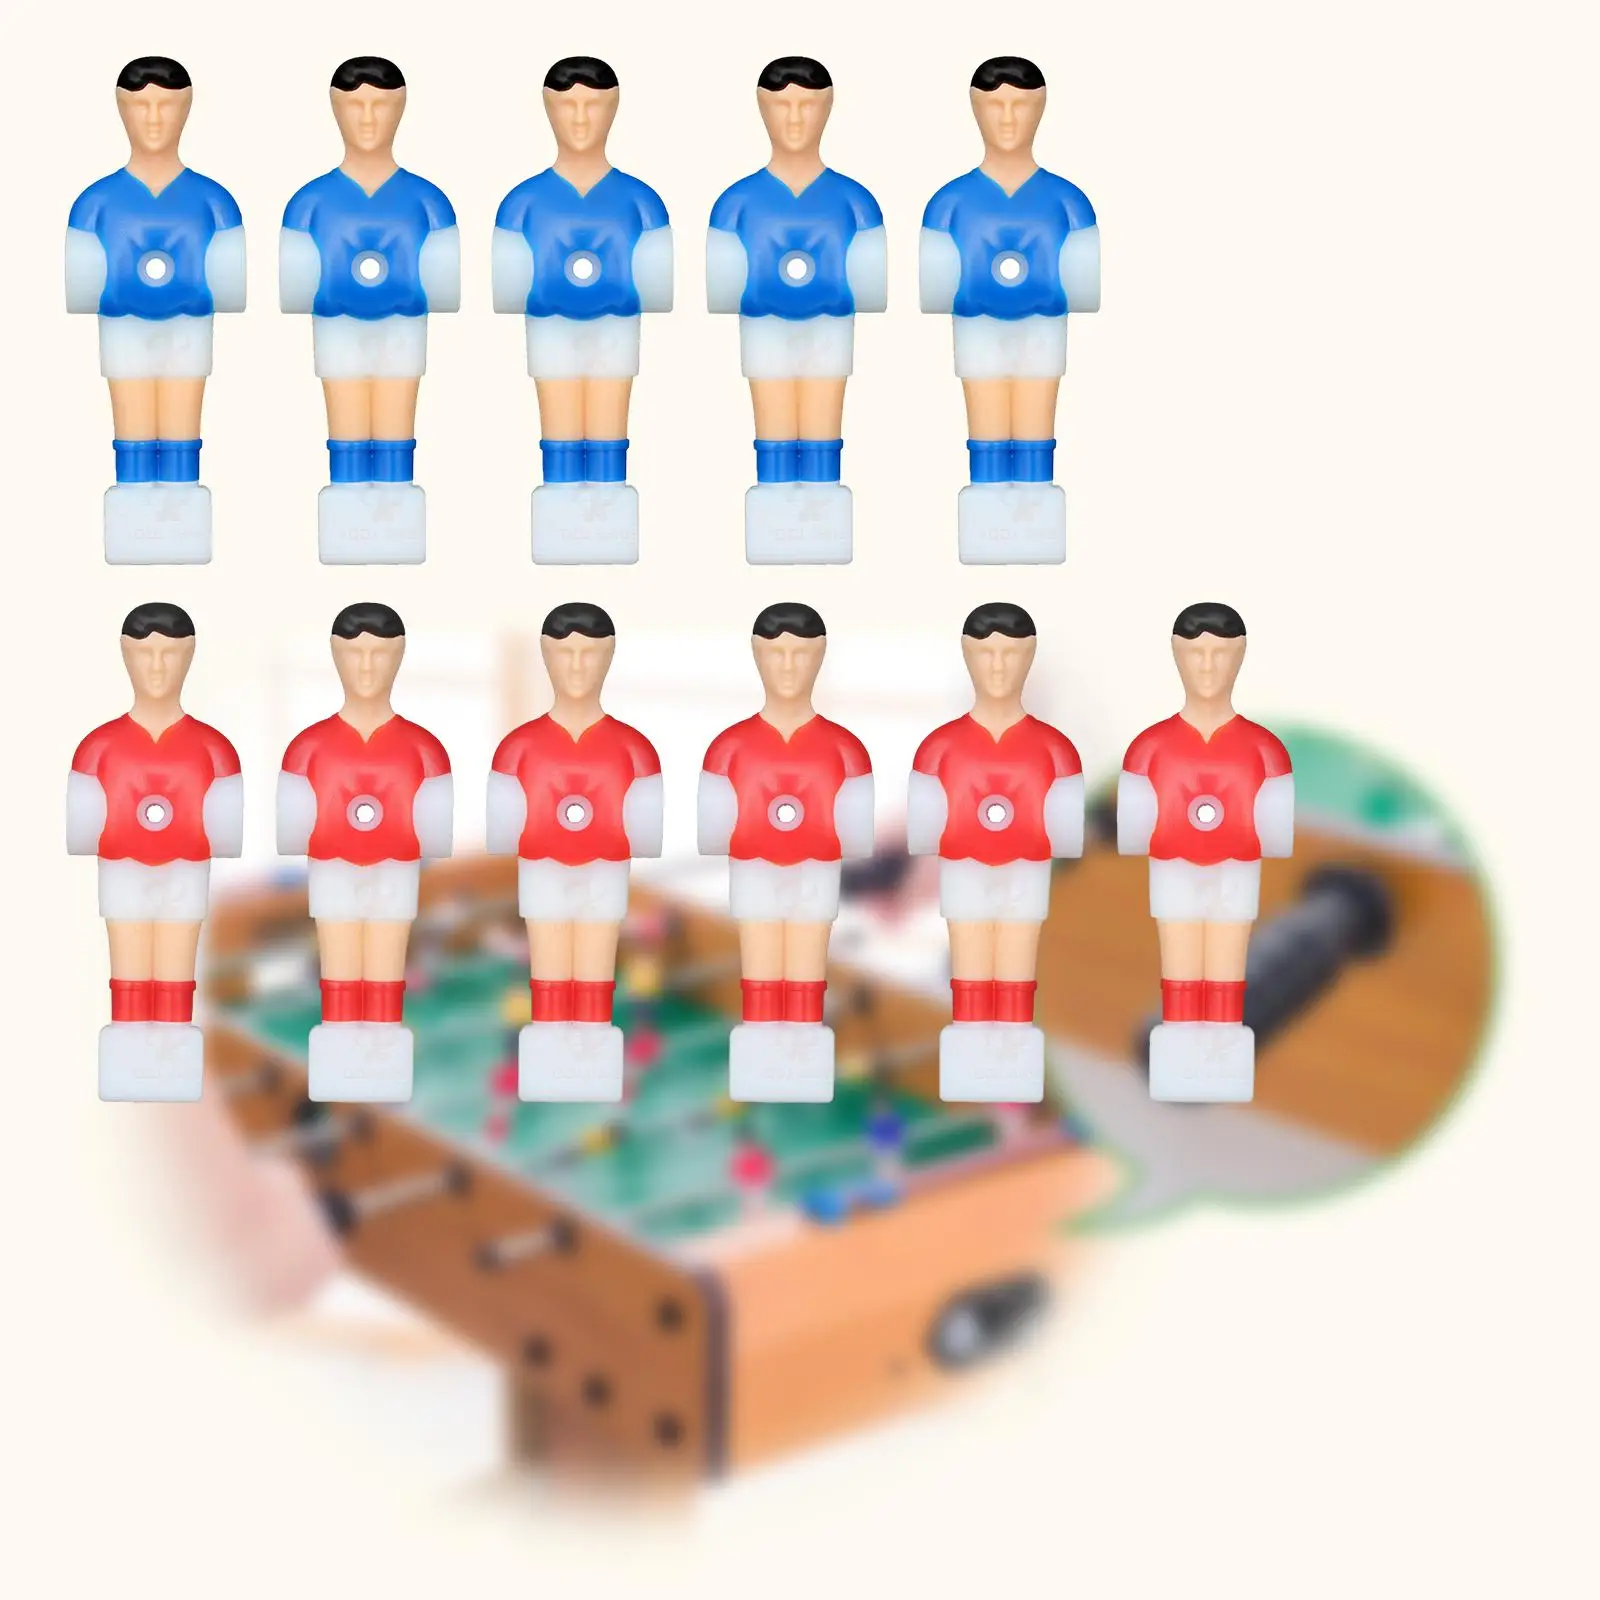 11x Foosball Men Replacements Soccer Table Player Foosball Soccer Table Football